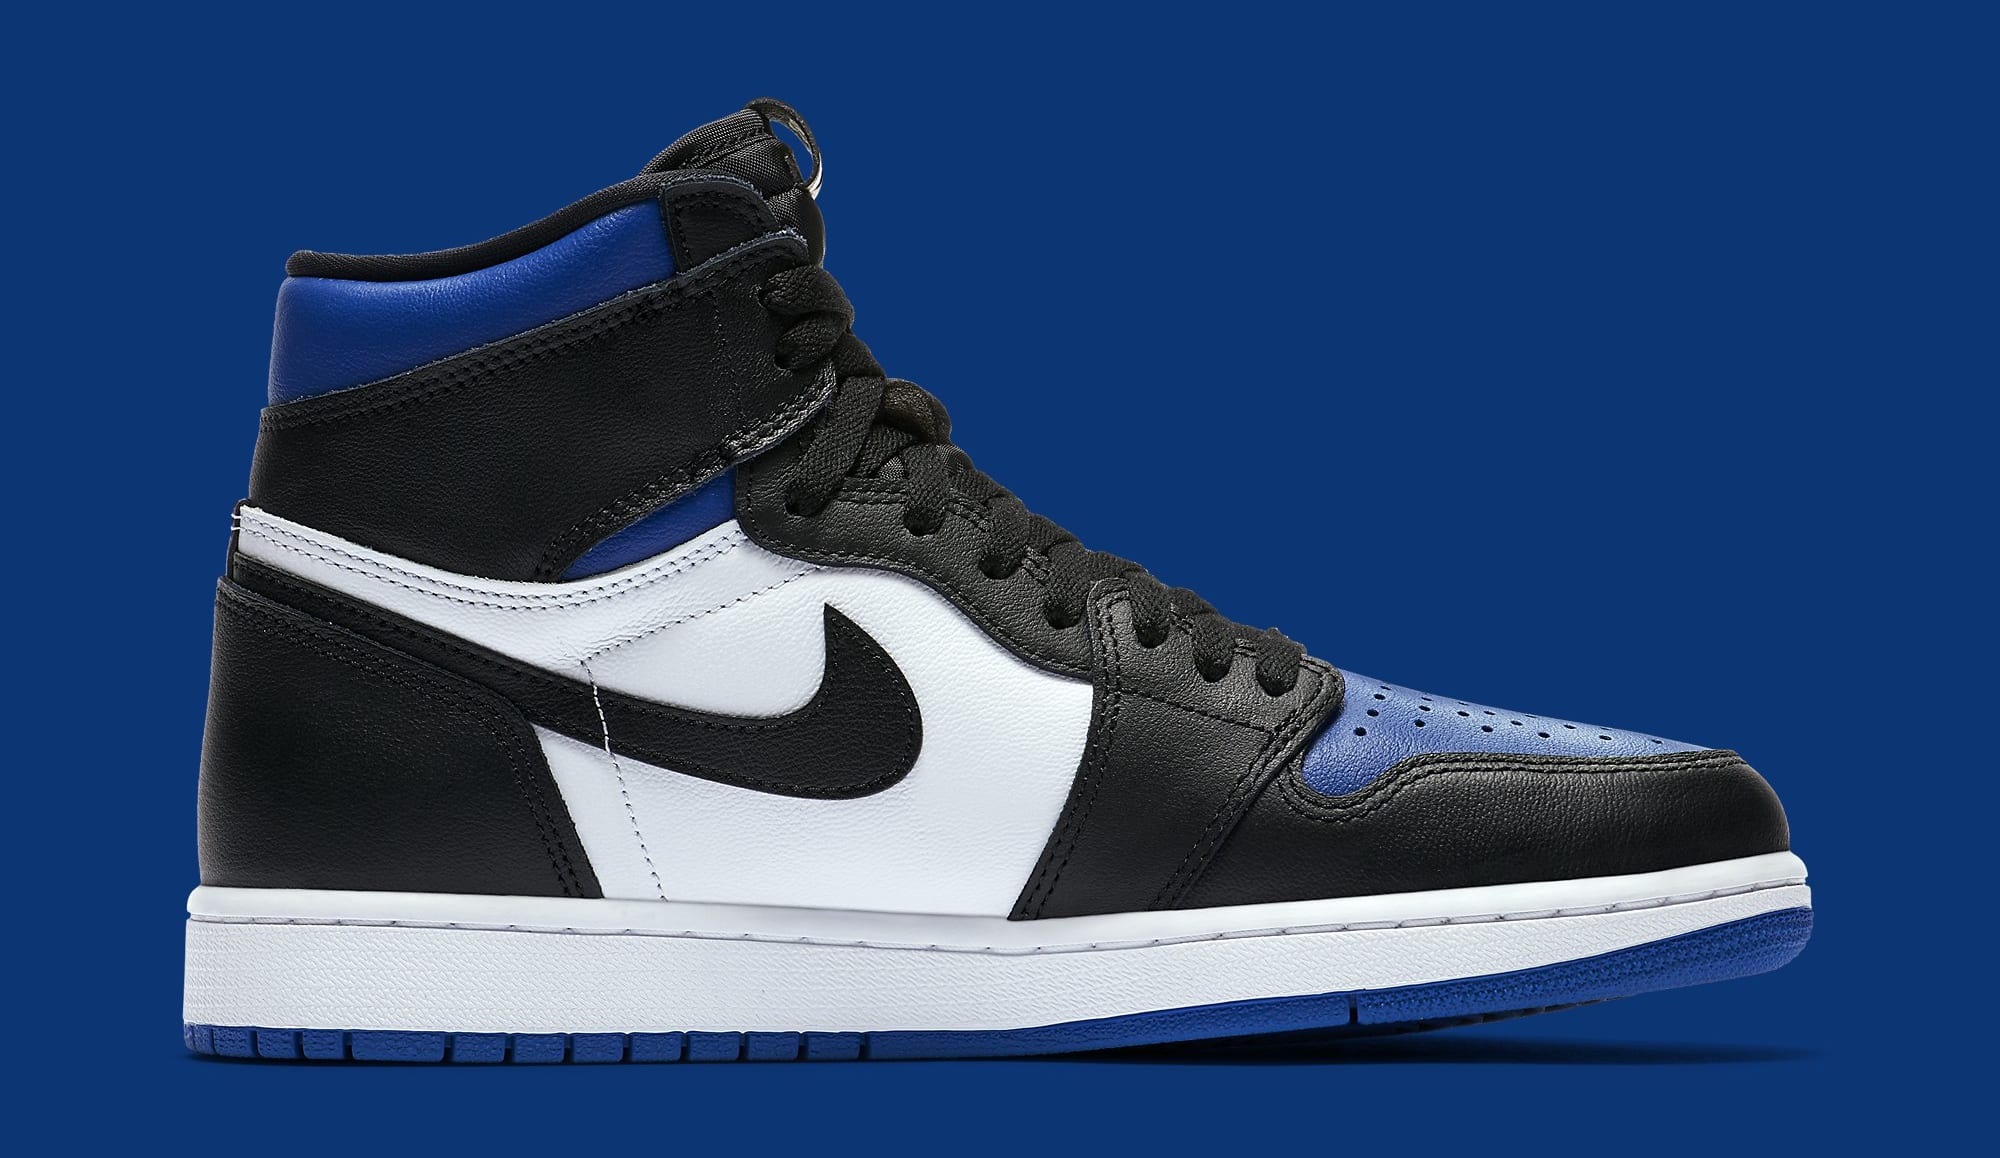 Air Jordan 1 Retro High Og Game Royal Release Date May 5550 041 Sole Collector